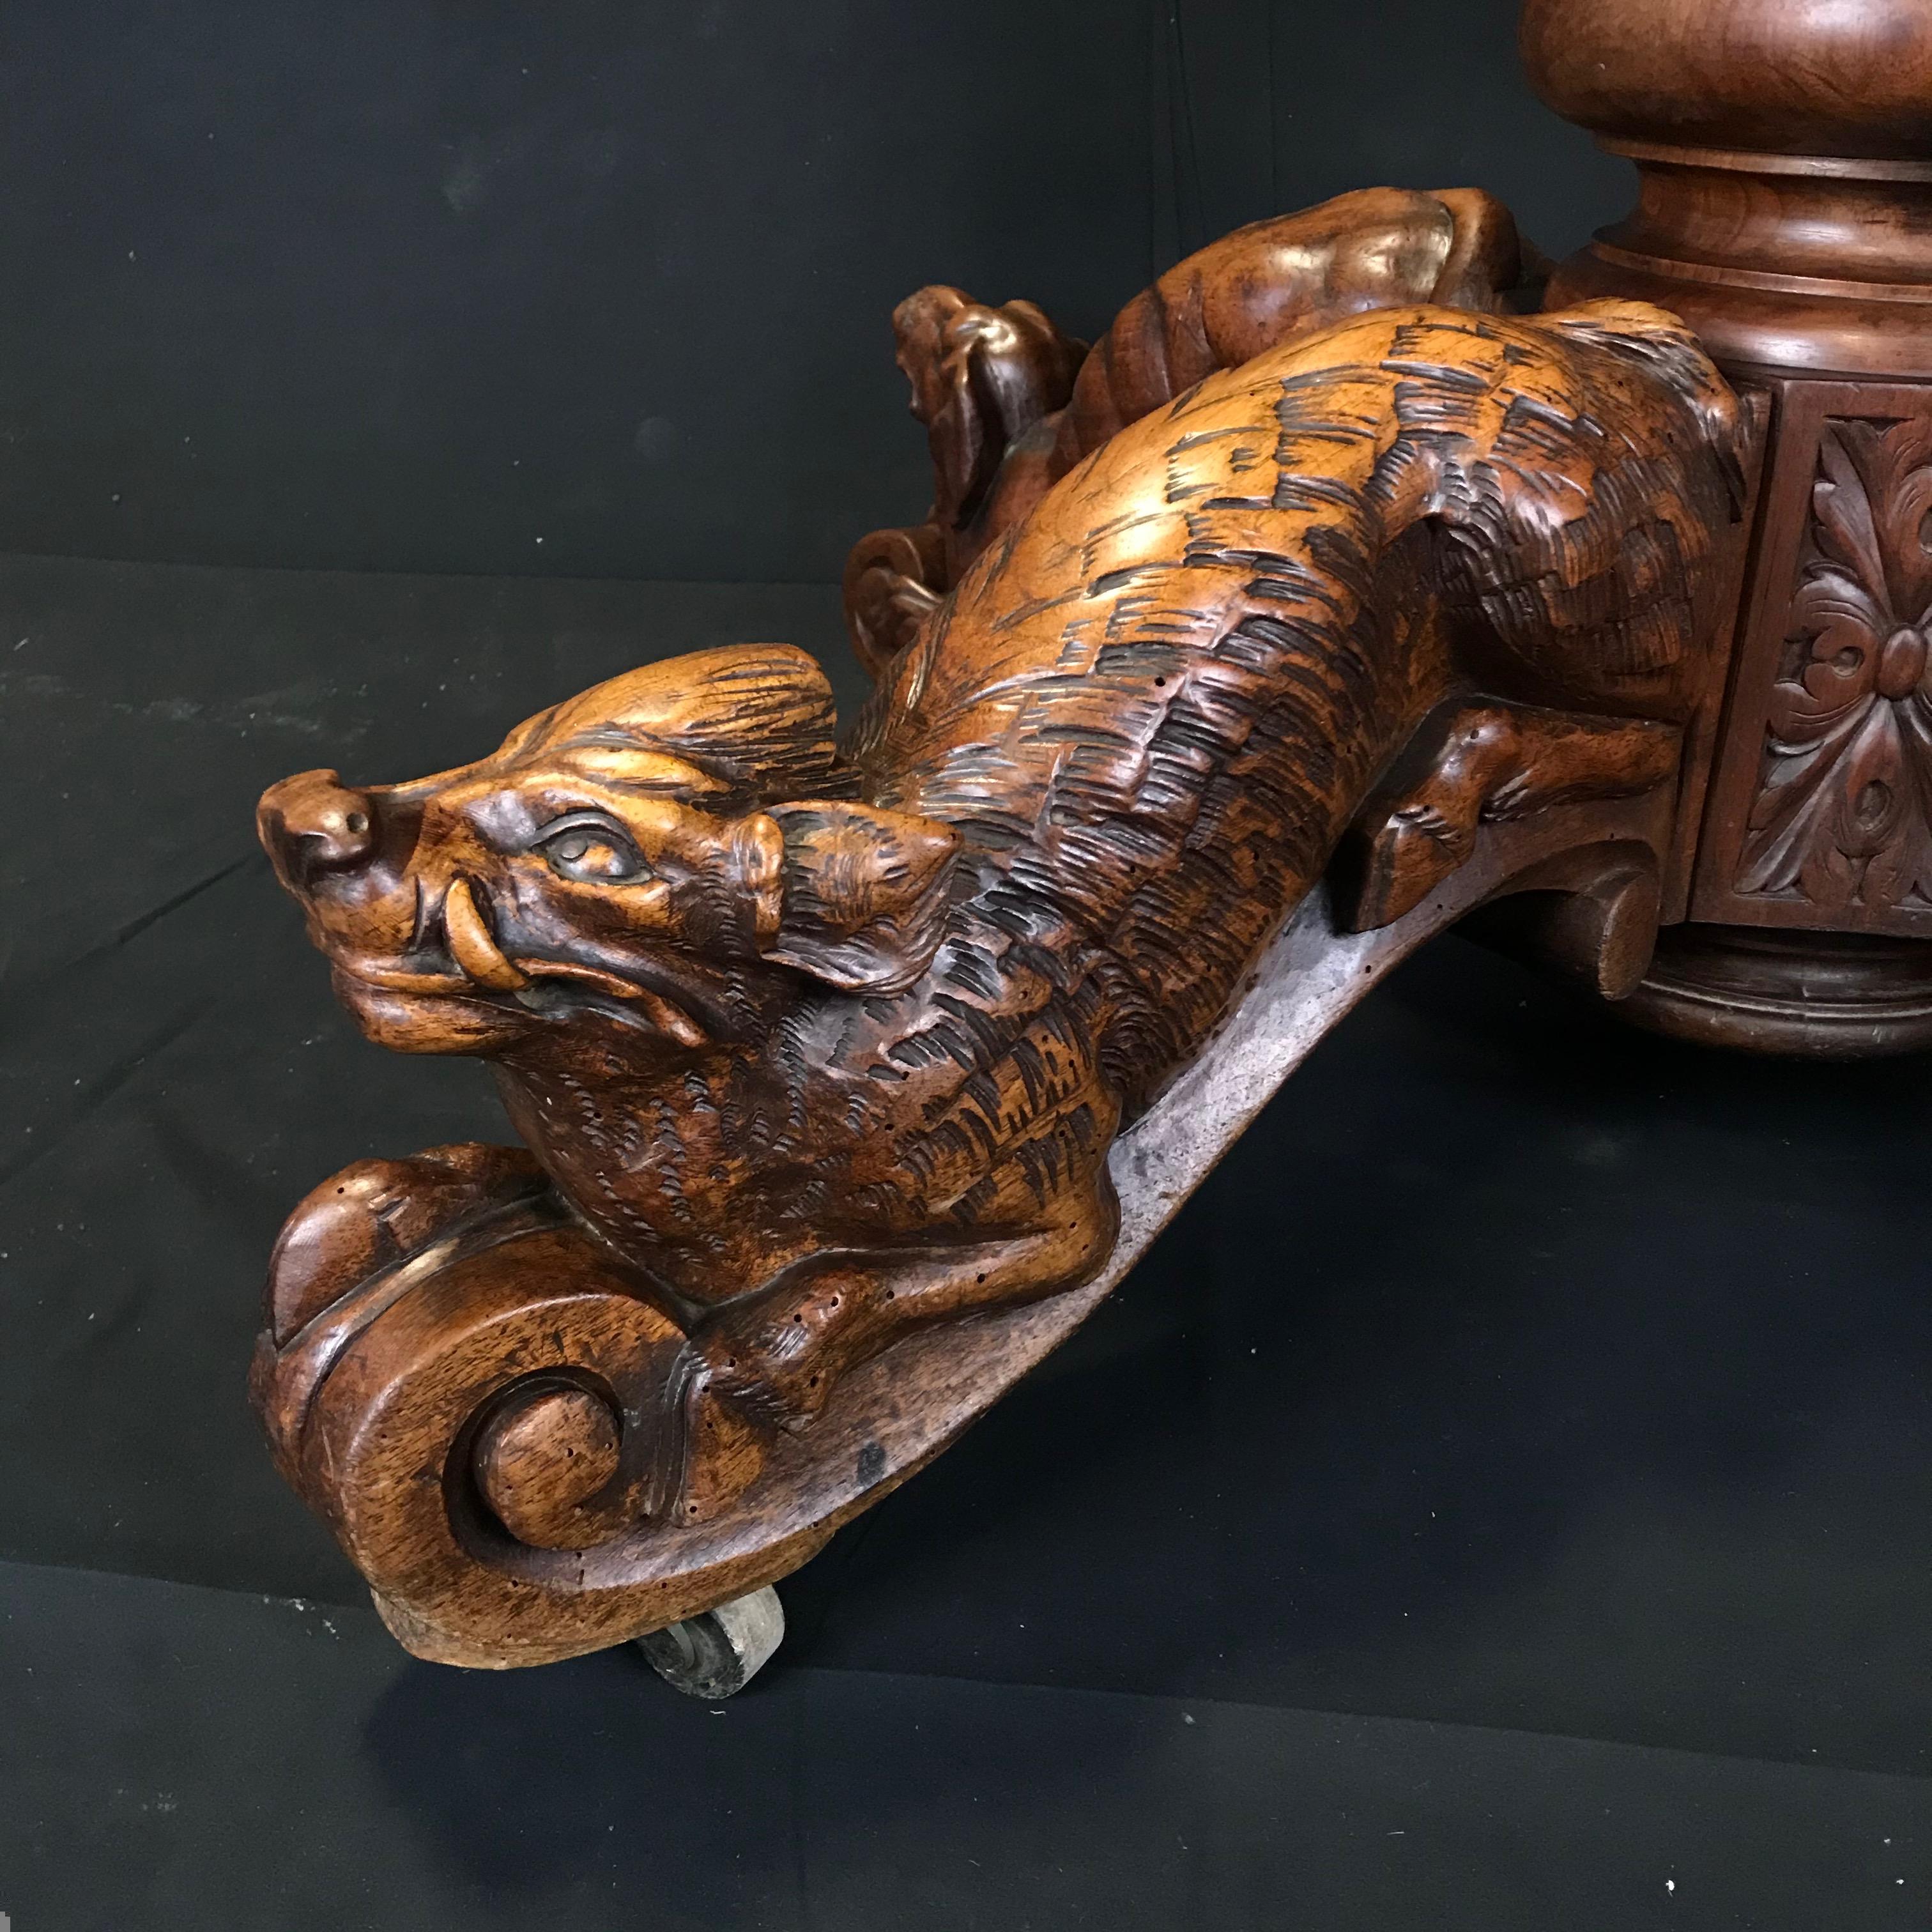 Renaissance Revival Incredible 19th Century Walnut Hunt Table with Boar, Dog, Deer and Fox